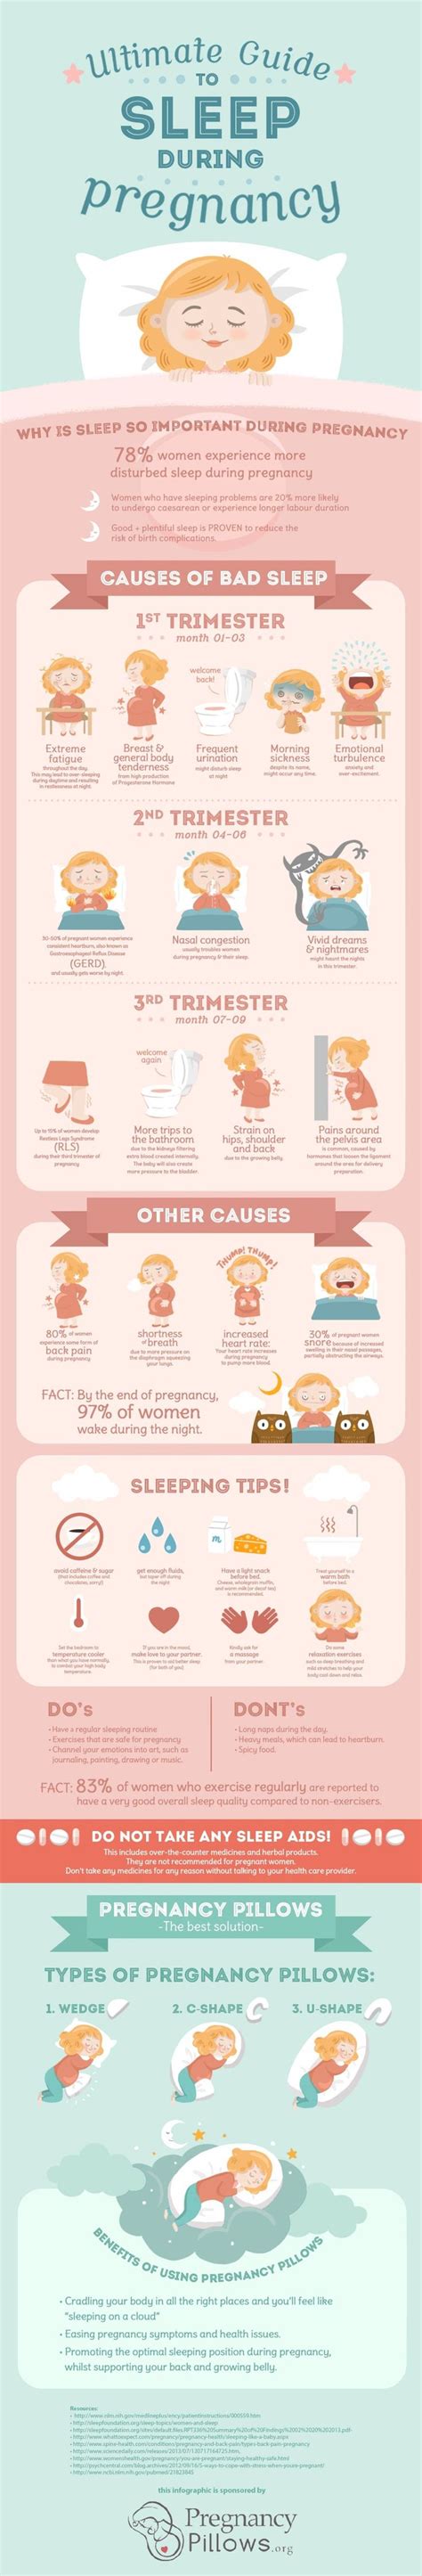 33 best images about pregnancy pro tips on pinterest labor morning sickness and heartburn